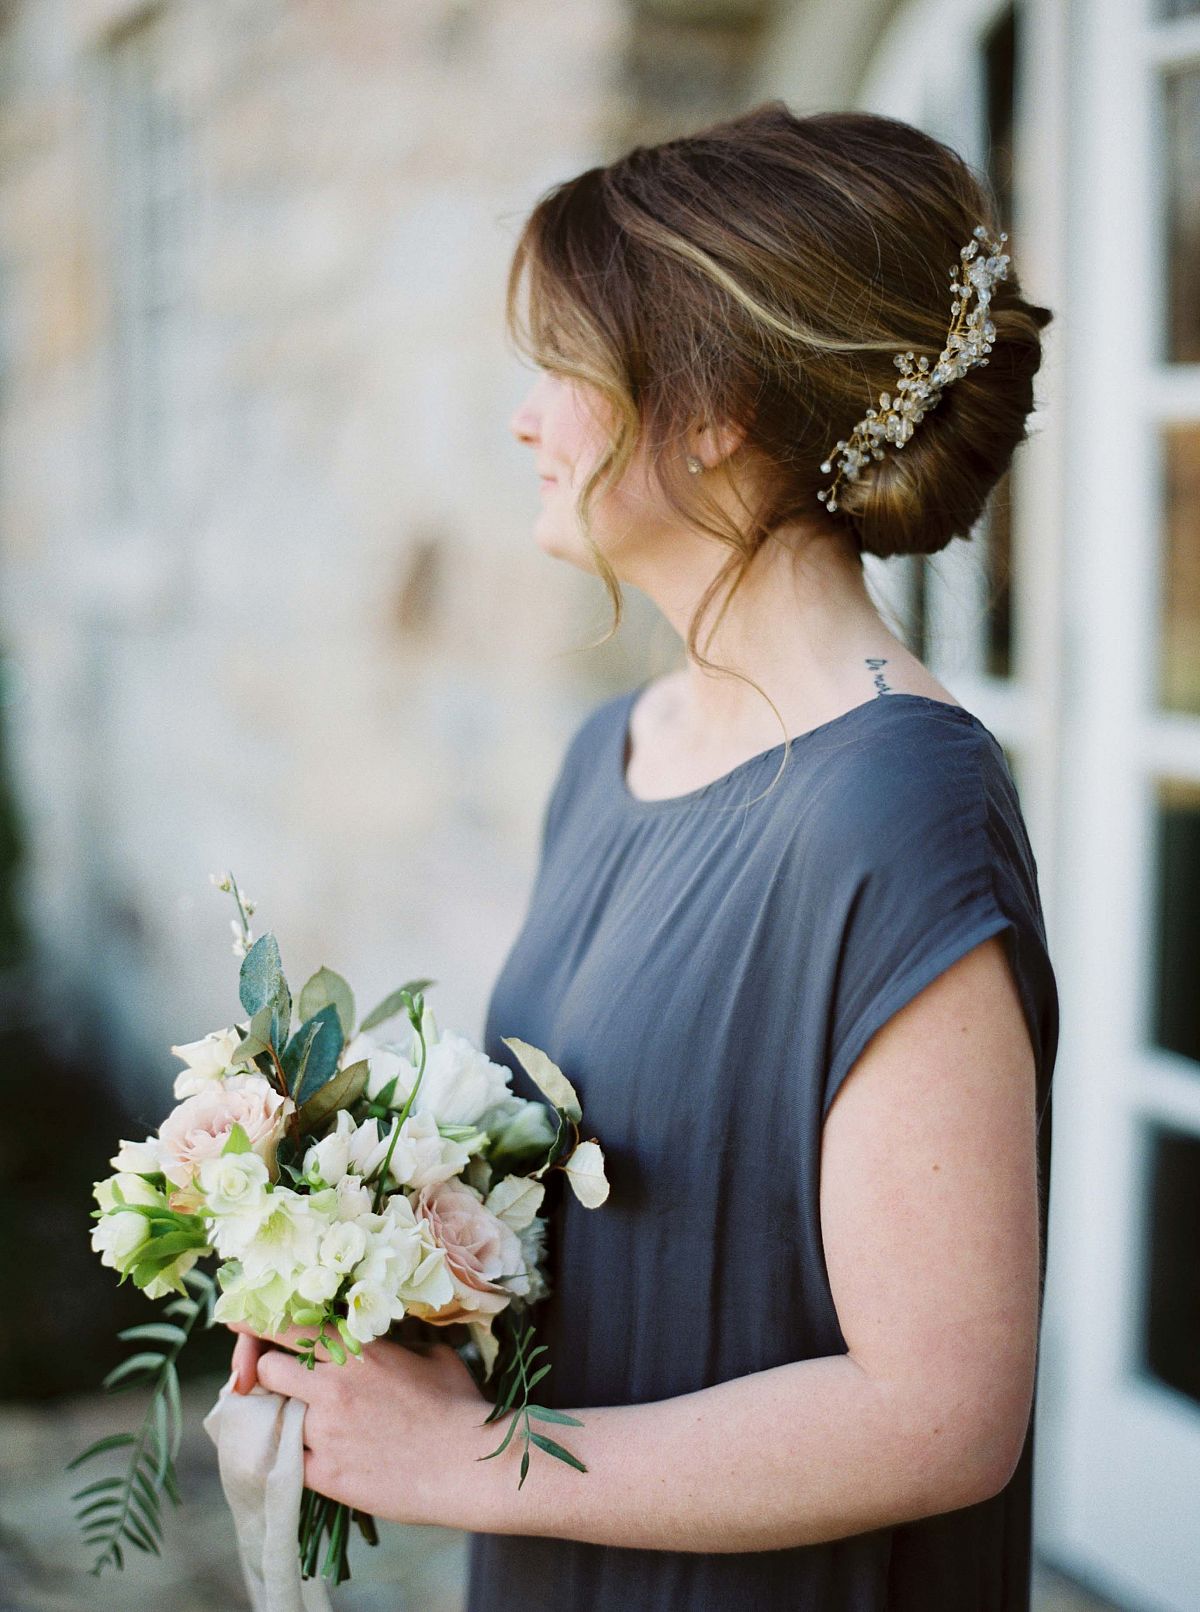 Romantic Garden Wedding Inspiration in a Lace Dress